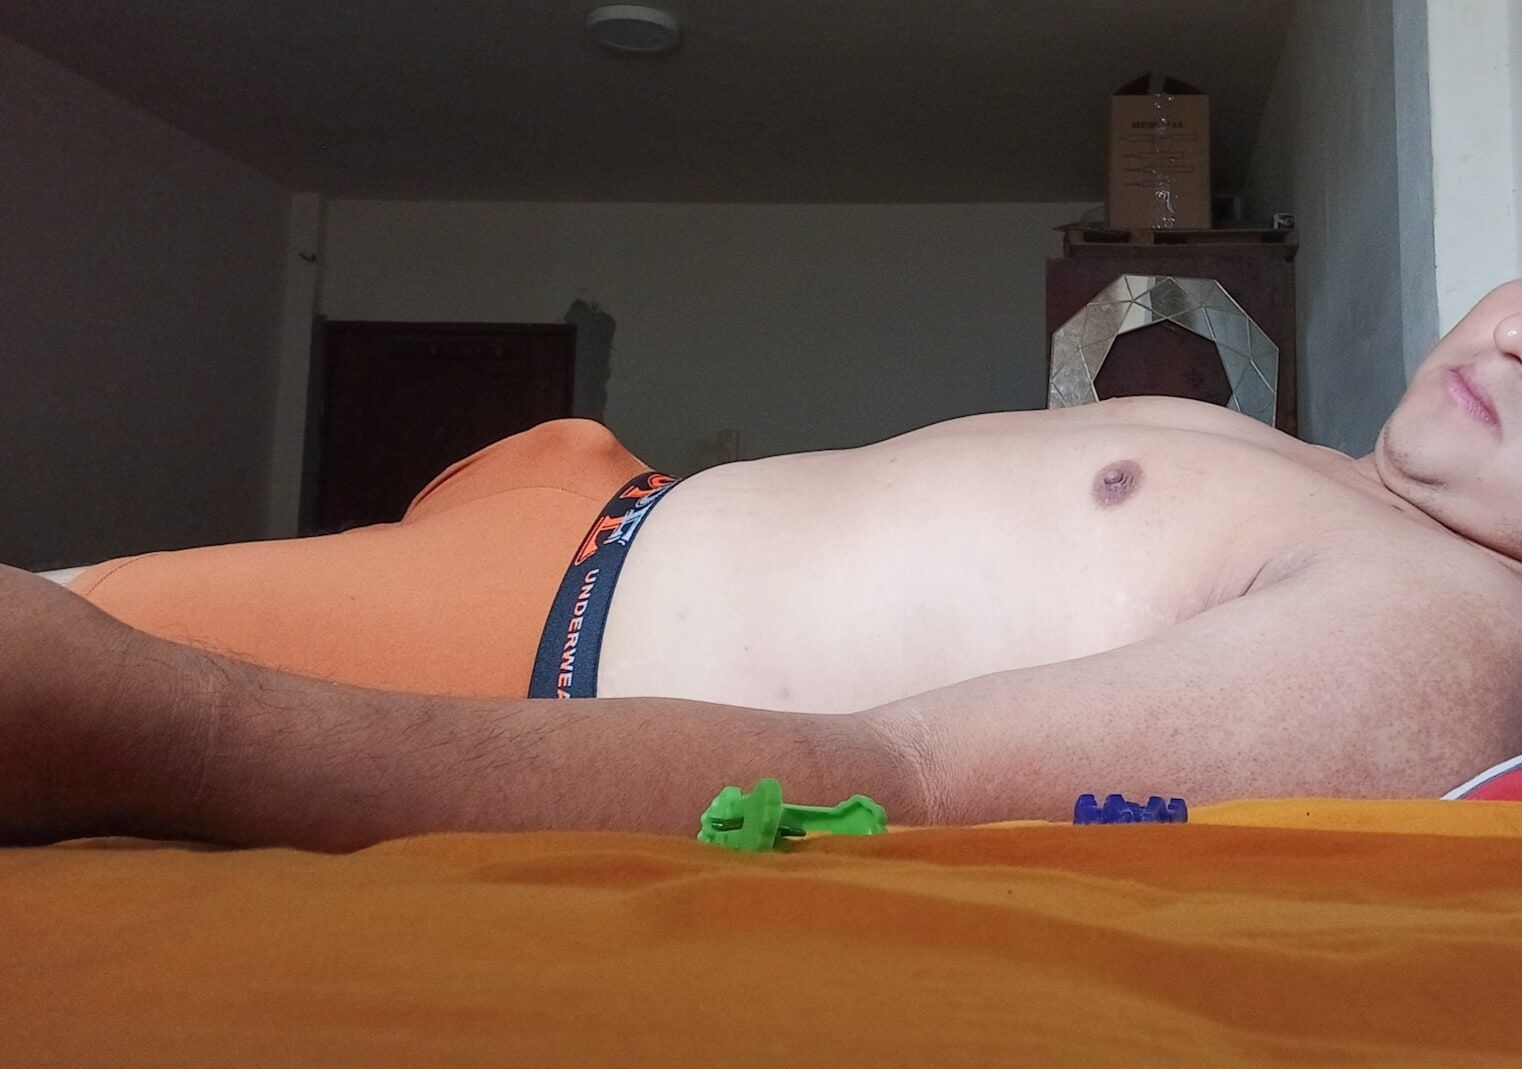 Me Lying Down and my Penis Standing - 01 (In Underwear) #23